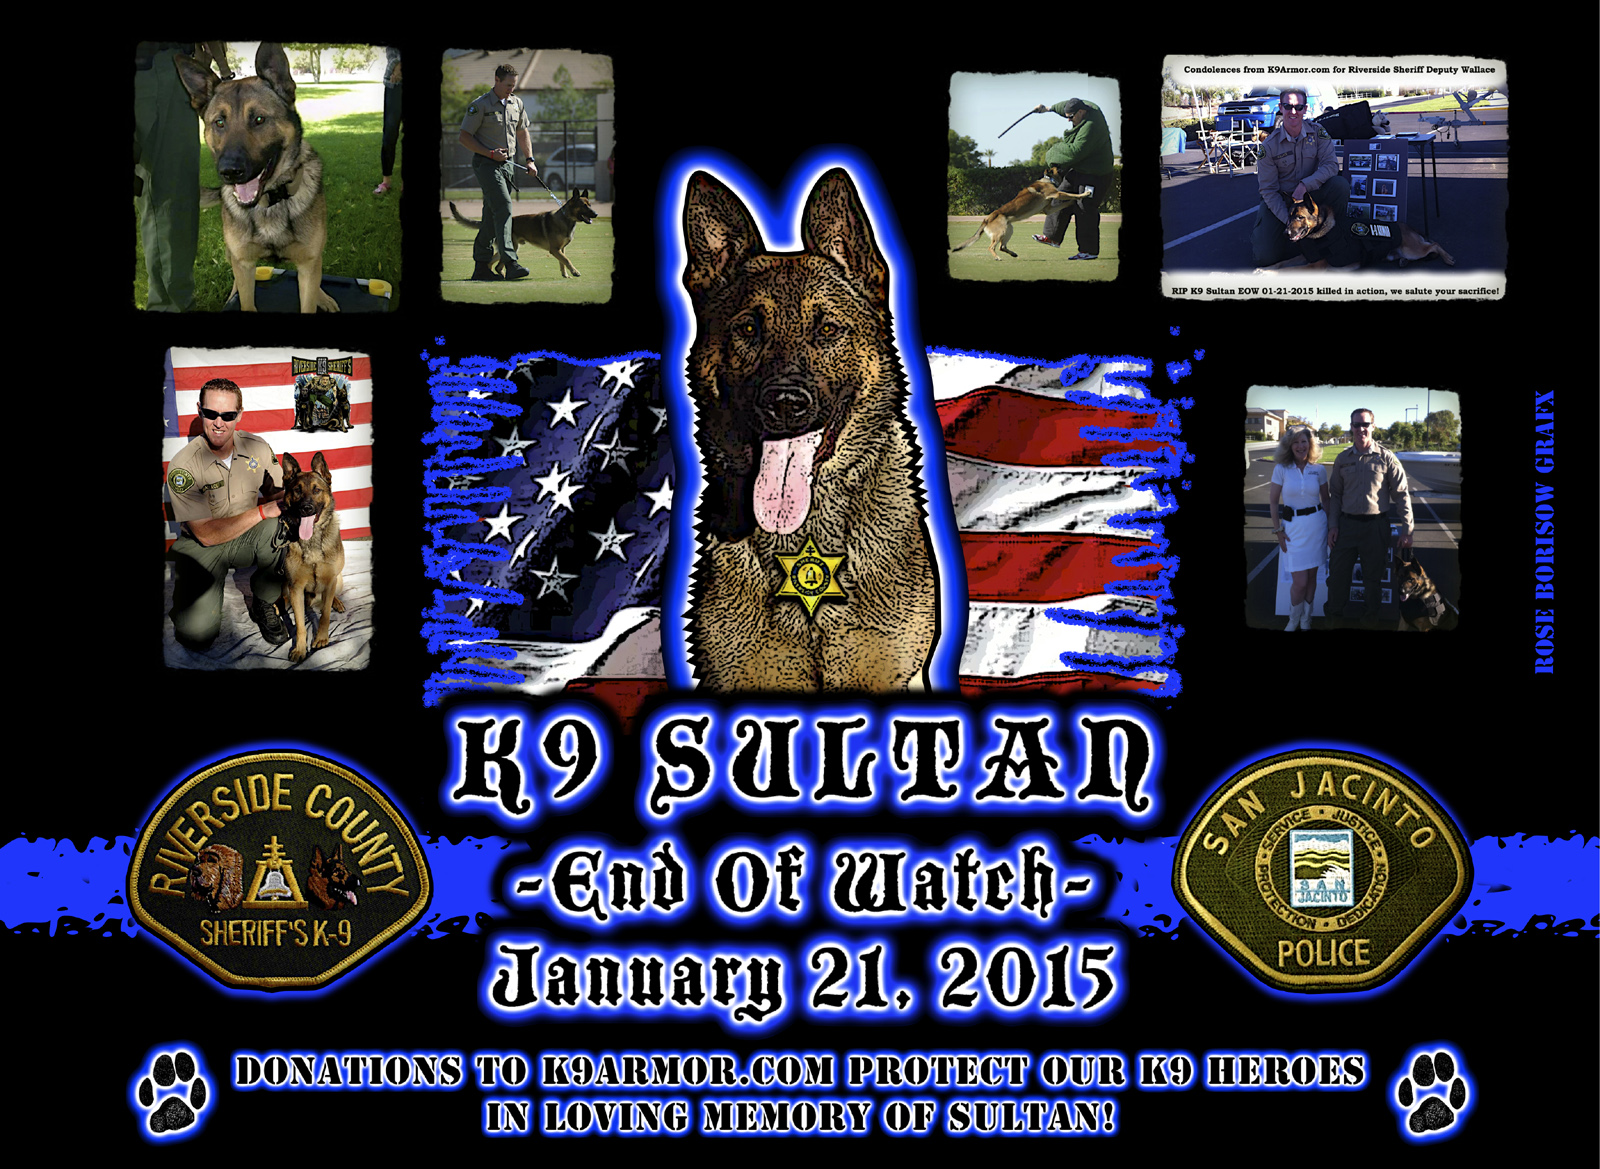 Donations to K9Armor.com protect our K9 Heroes in loving memory of K9 Sultan. Memorial Tribute by Officer Rose Borisow